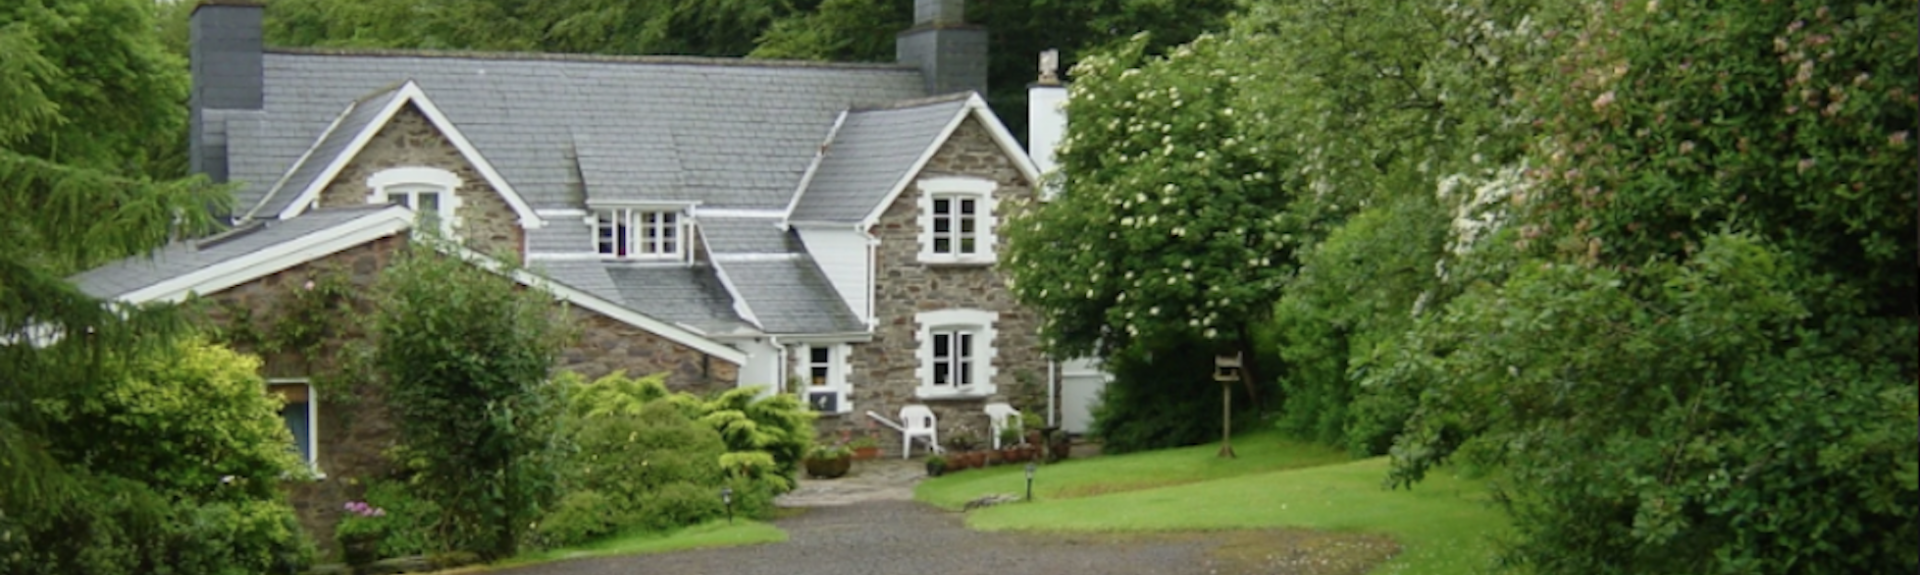 Click title above to view this Exmoor Cottage